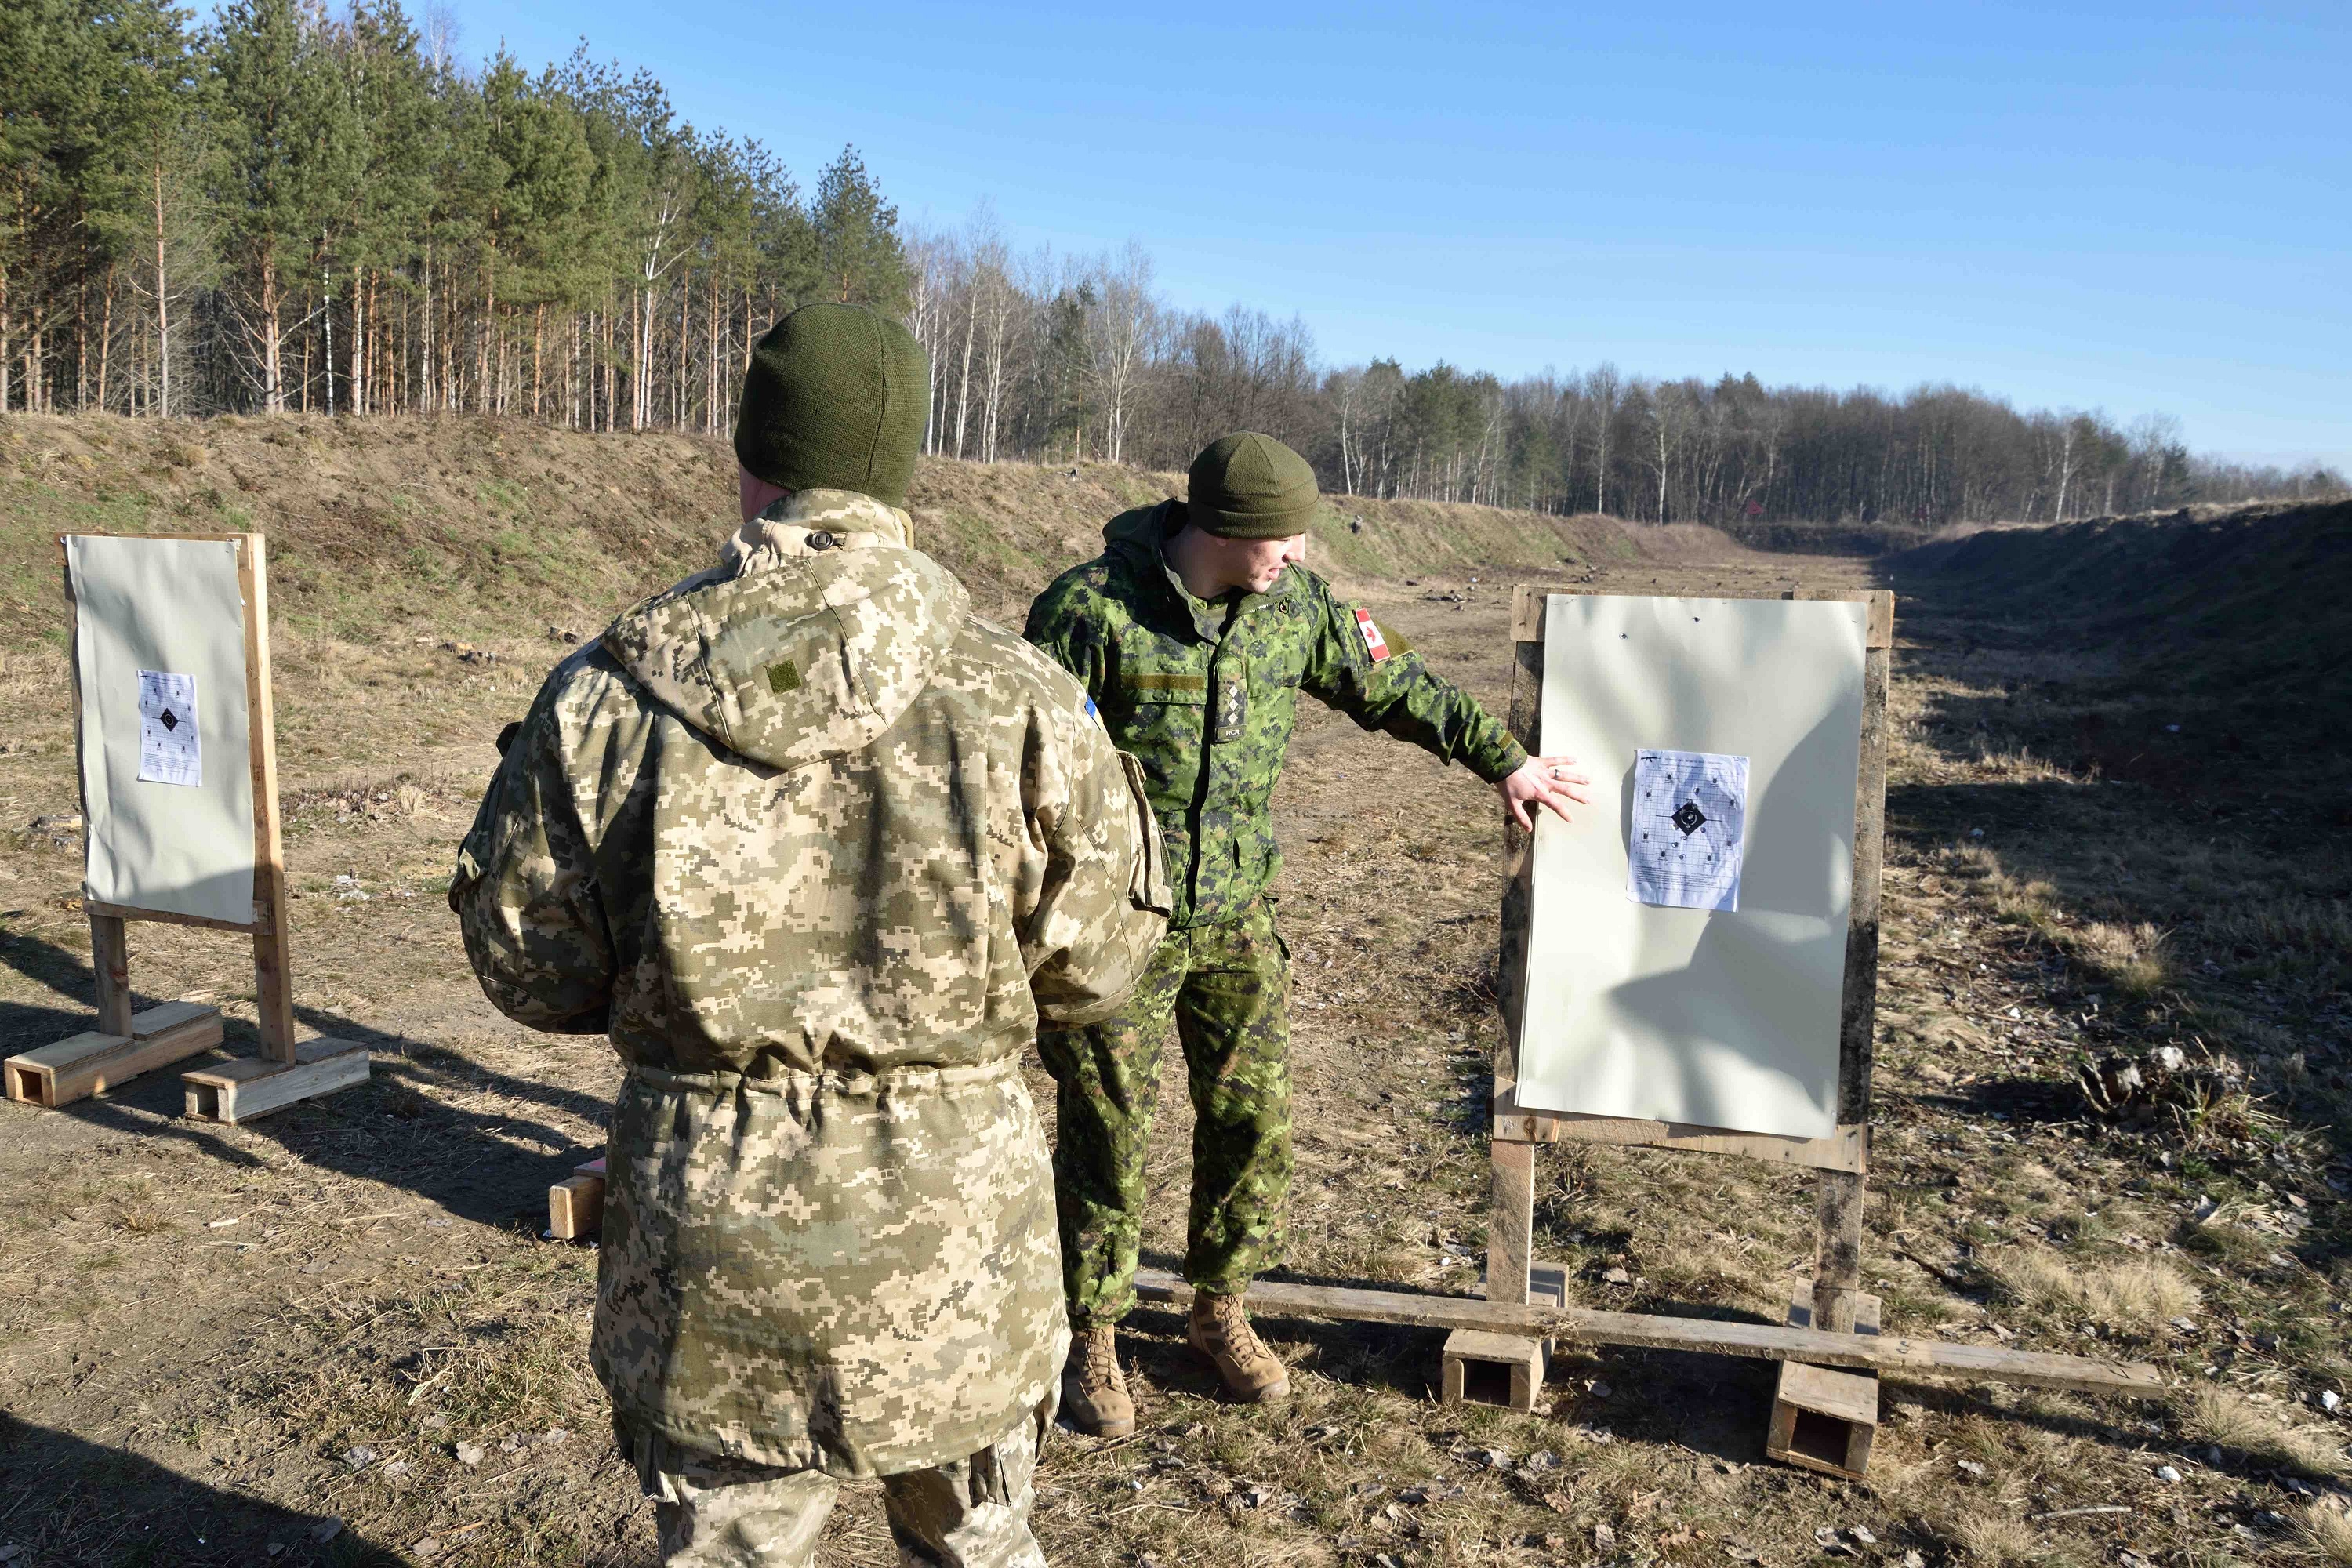 A Canadian Armed Forces trainer from Joint Task Force-Ukraine mentors a member of the Ukrainian Rotational Training Unit on personal weapons drills on a range during Operation UNIFIER at the International Peacekeeping and Security Centre in Starychi, Ukraine on January 31, 2018. Photo: Joint Task Force - Ukraine 